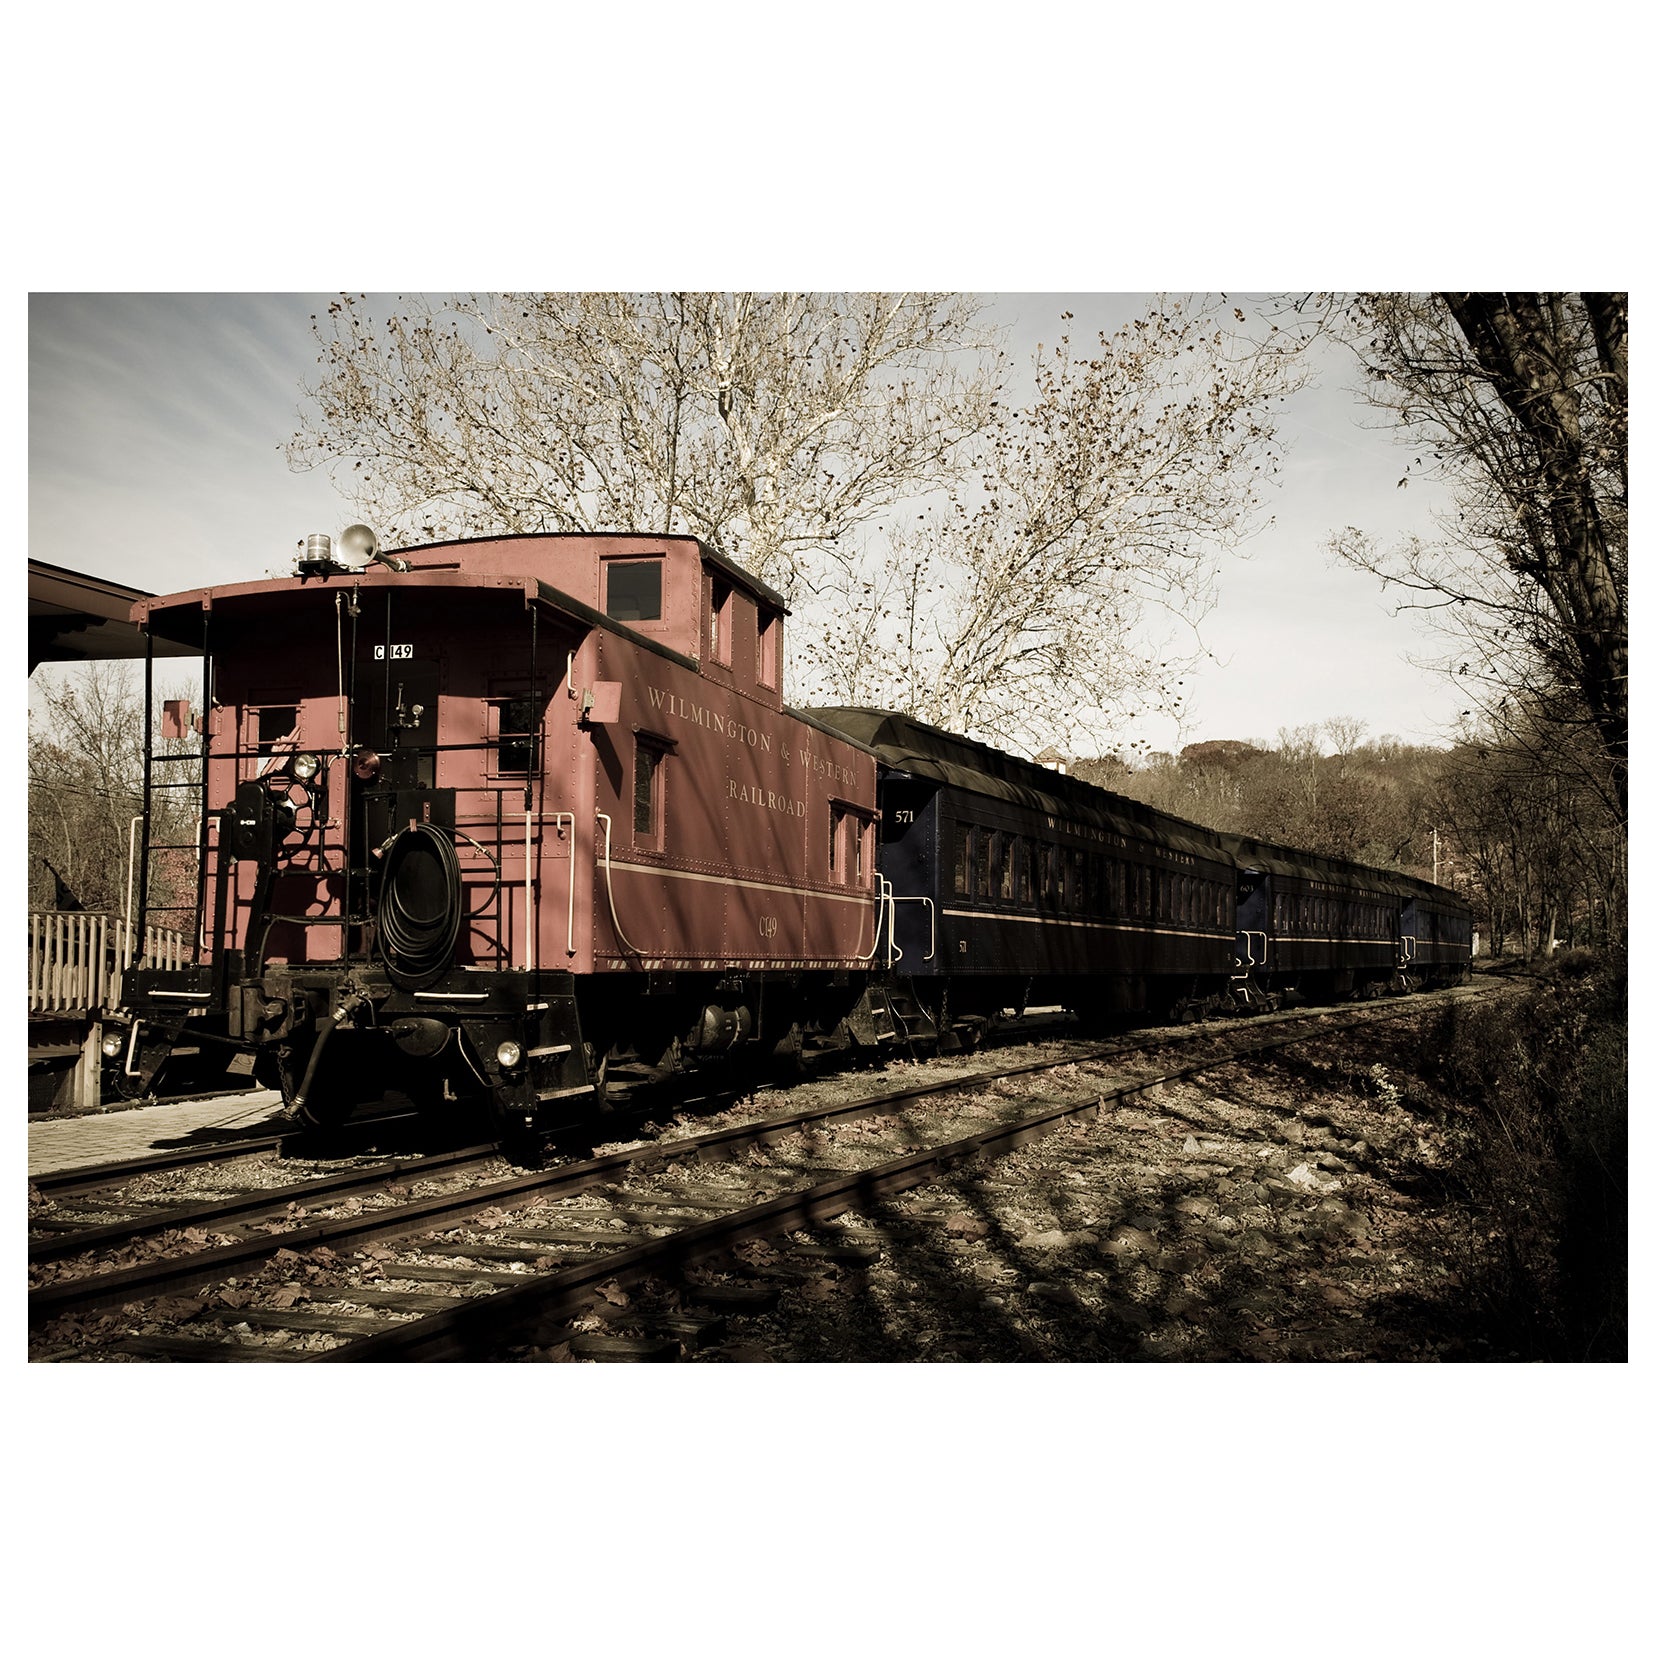 Aged Steam Train Abstract Photo Fine Art Canvas & Unframed Wall Art Prints  - PIPAFINEART